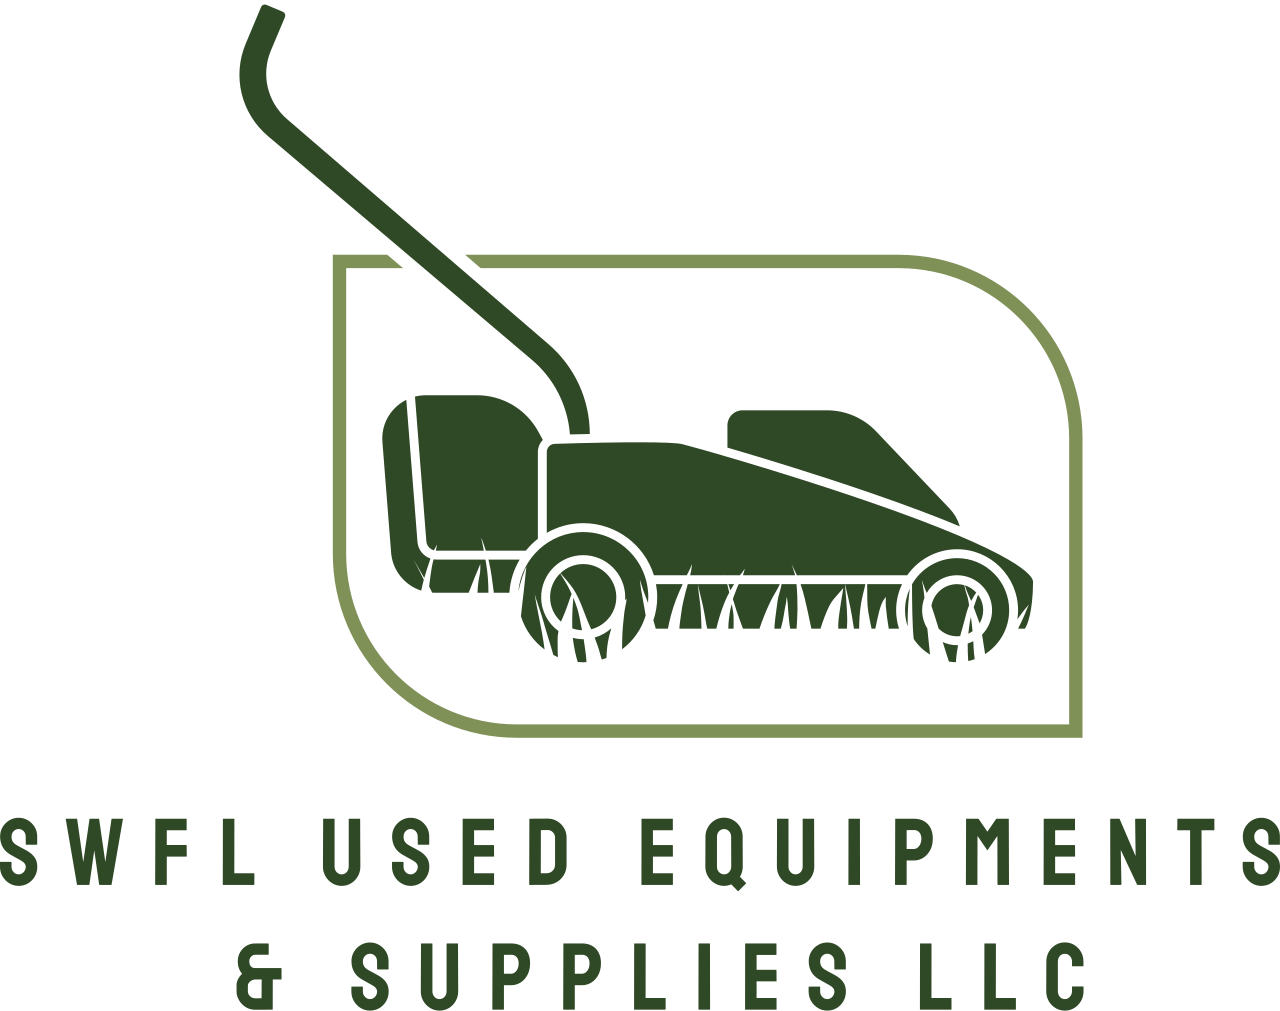 SWFL Used Equipments 
& Supplies LLC's web page